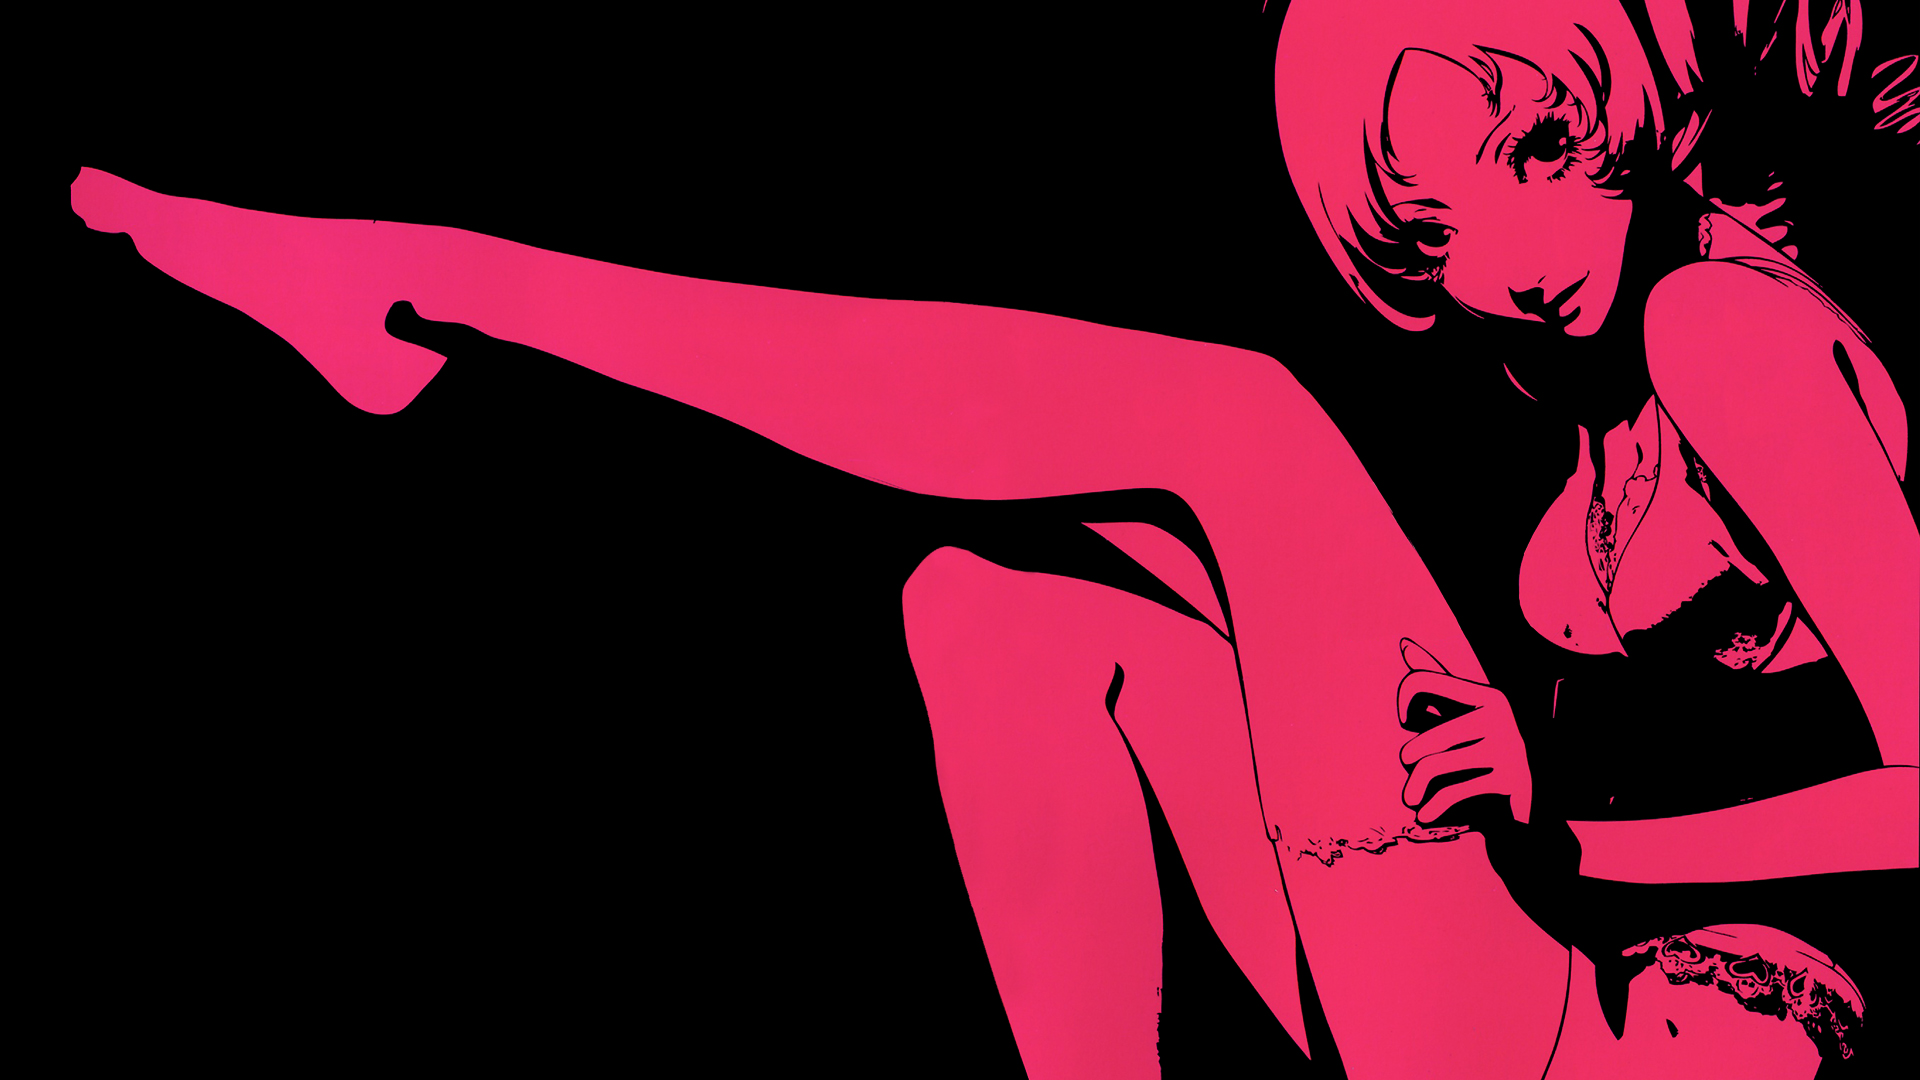 Images of Catherine | 1920x1080